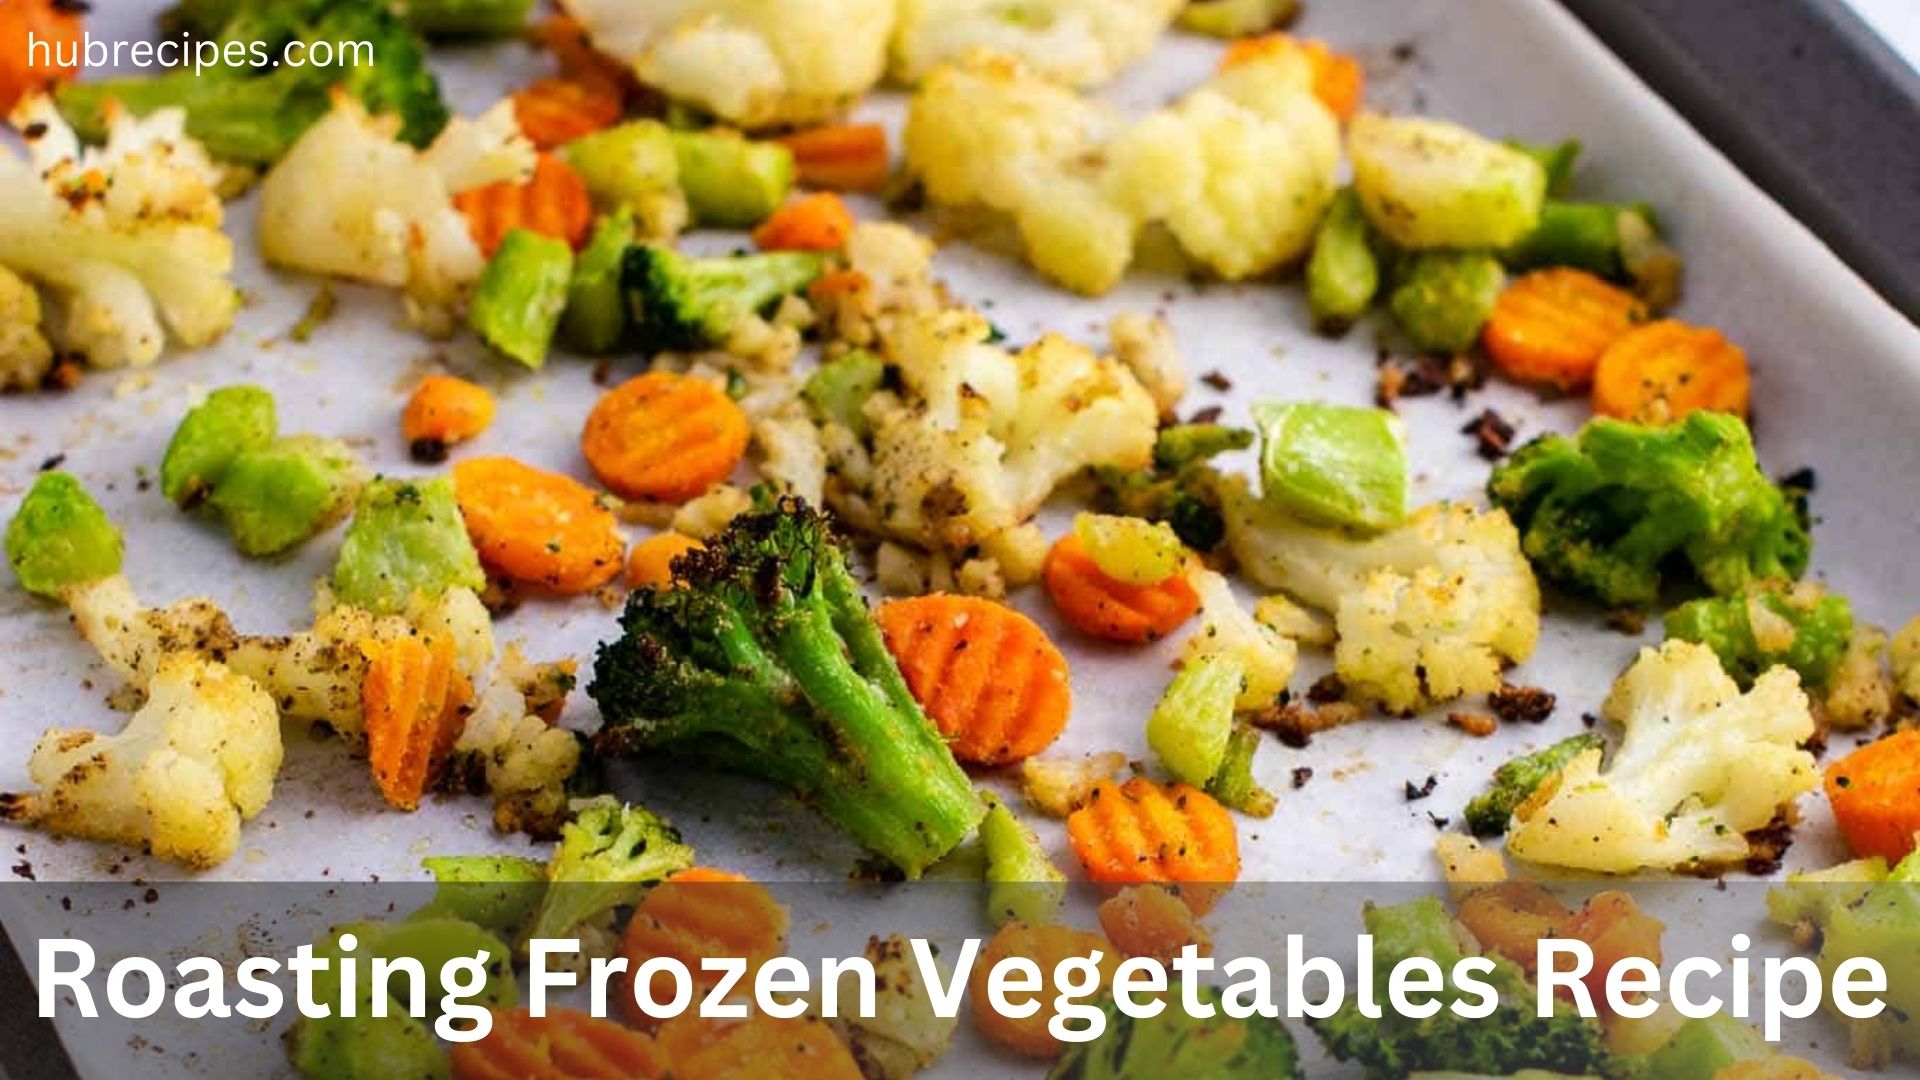 Roasting Frozen Vegetables: Recipe and Tips